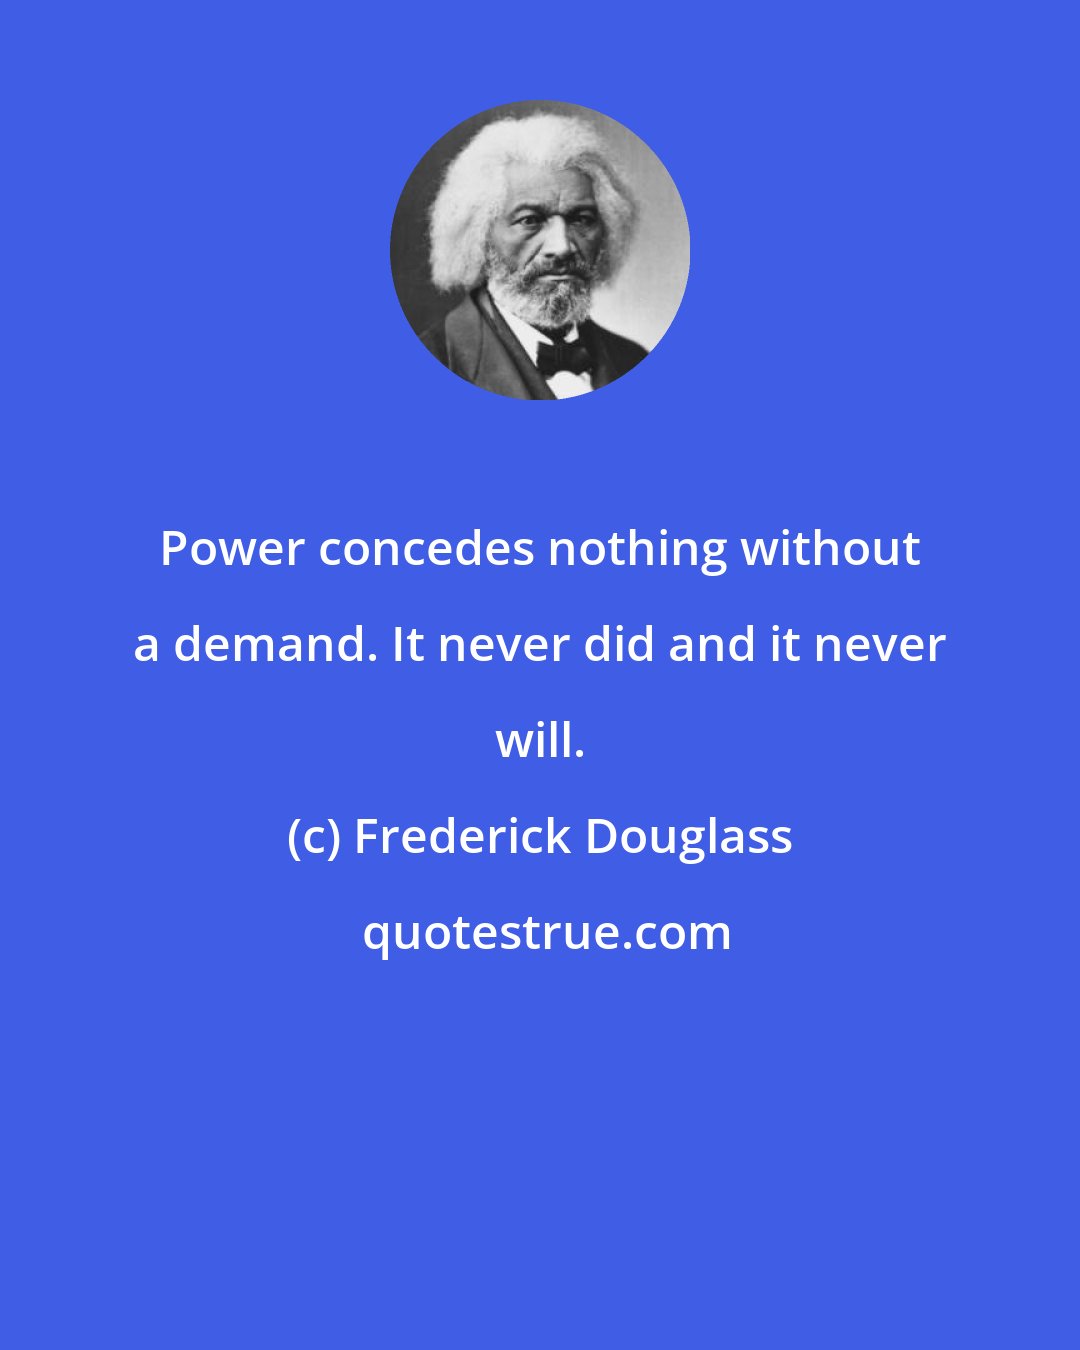 Frederick Douglass: Power concedes nothing without a demand. It never did and it never will.